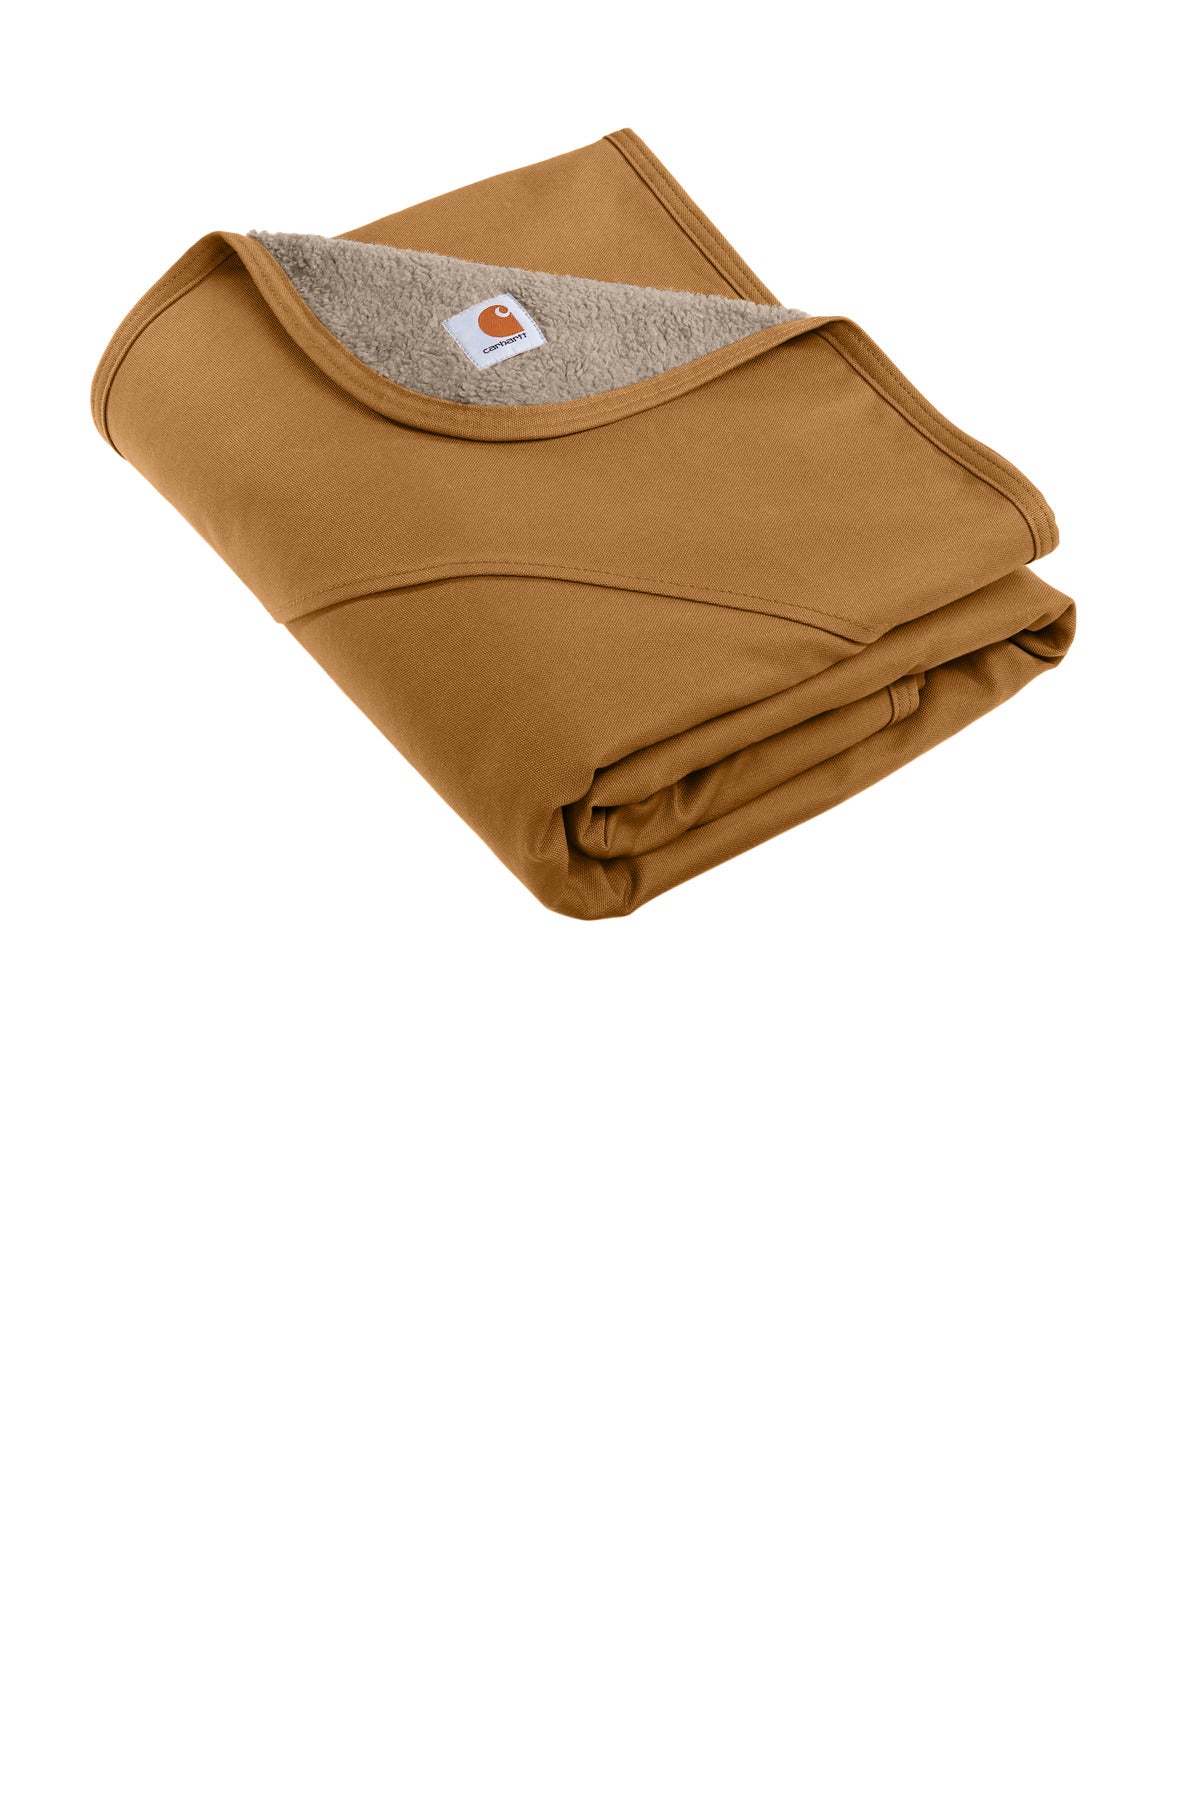 Carhartt® Firm Duck Sherpa-Lined Blanket CTP0000502